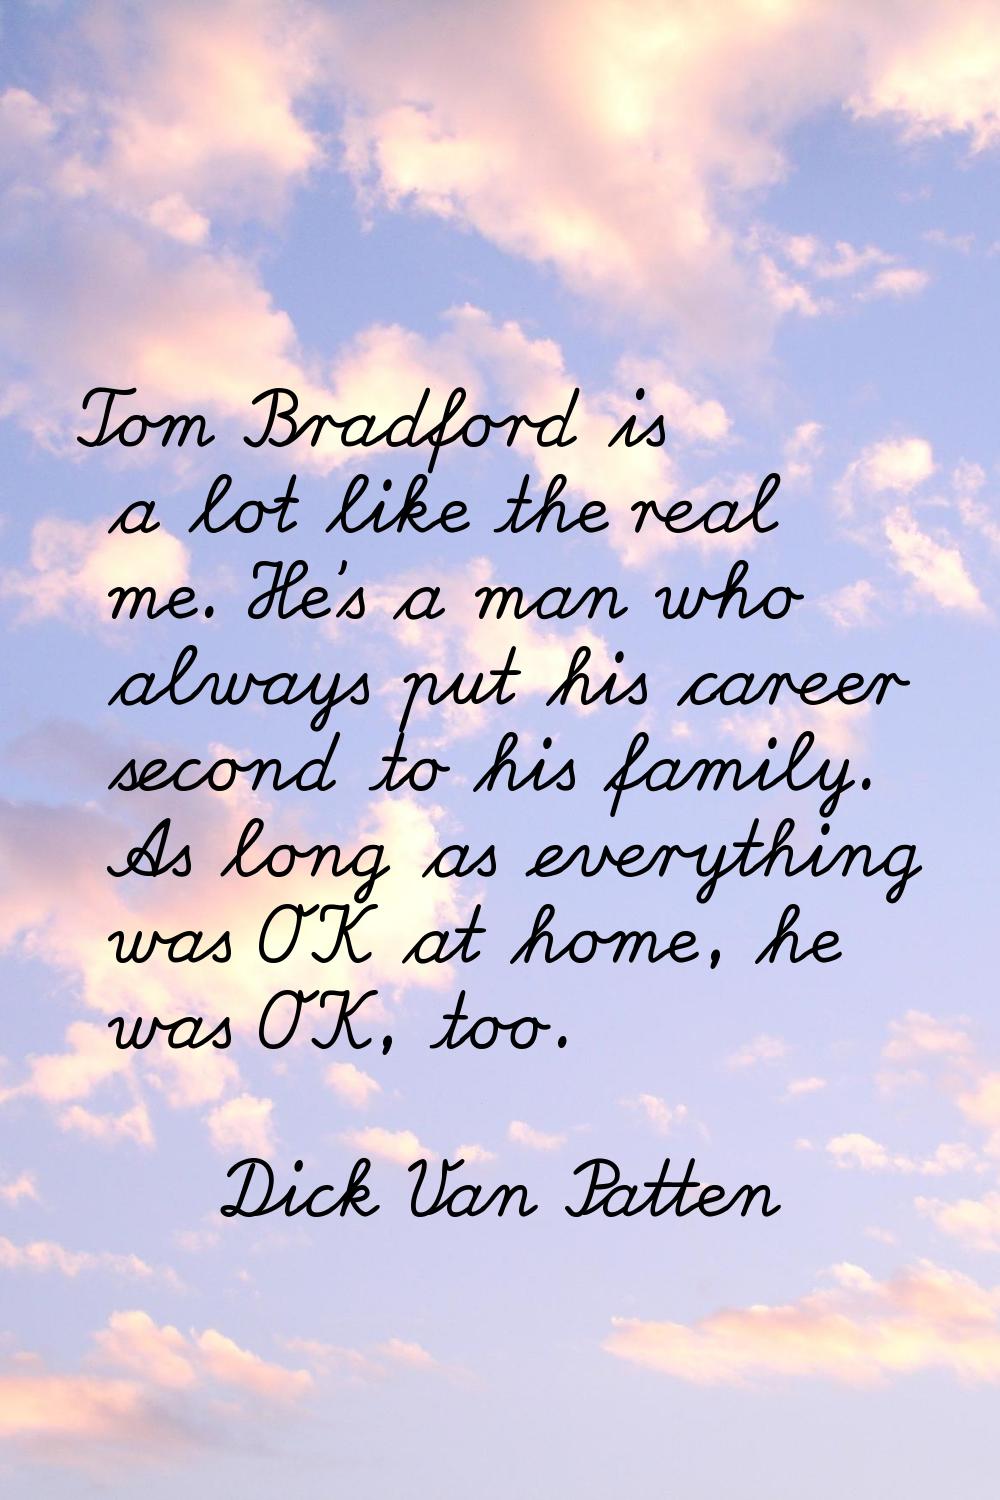 Tom Bradford is a lot like the real me. He's a man who always put his career second to his family. 